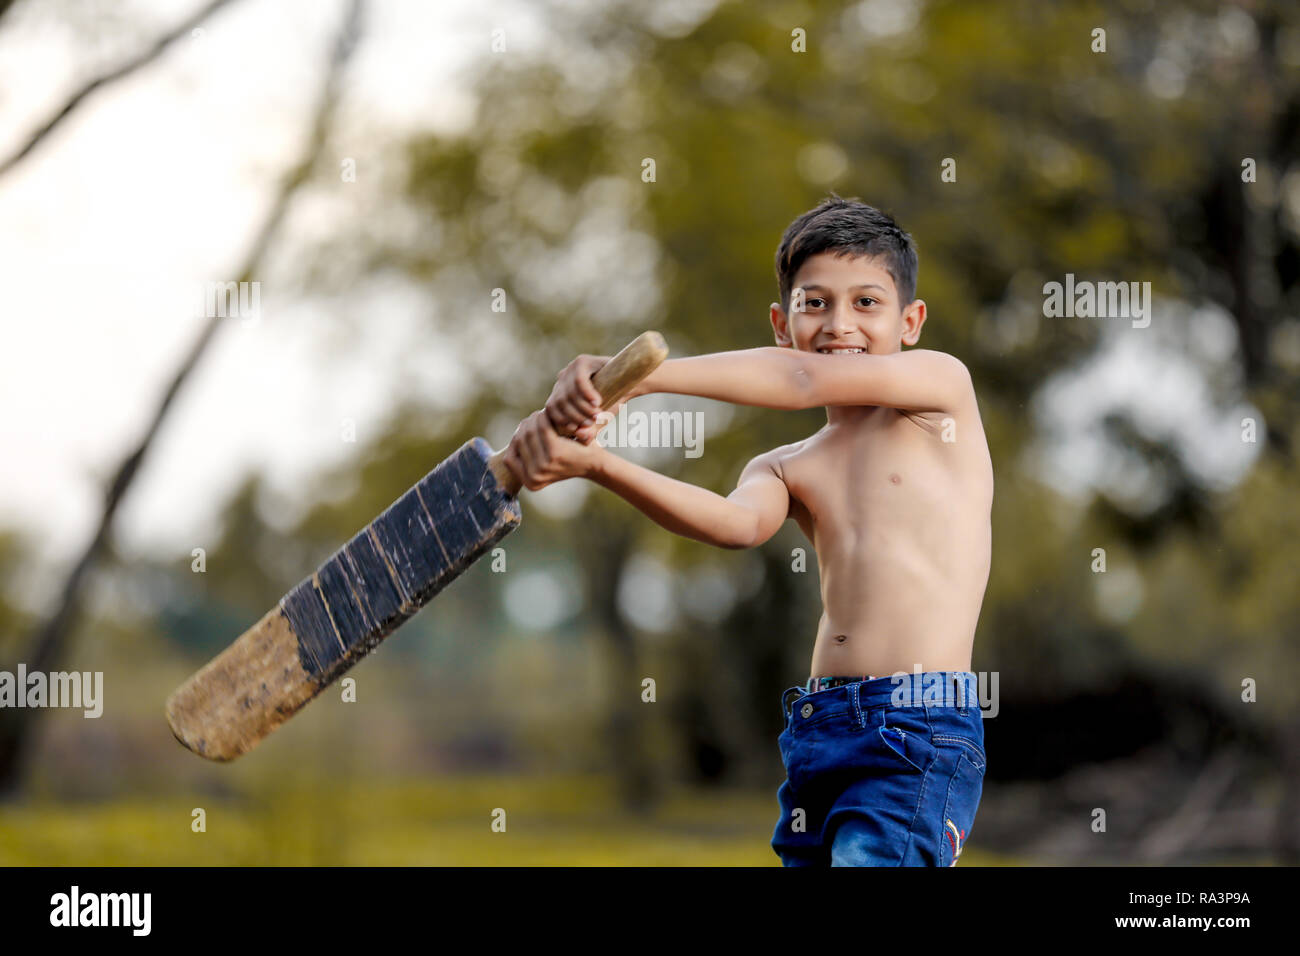 Rural Indian Child Playing Cricket Stock Photo